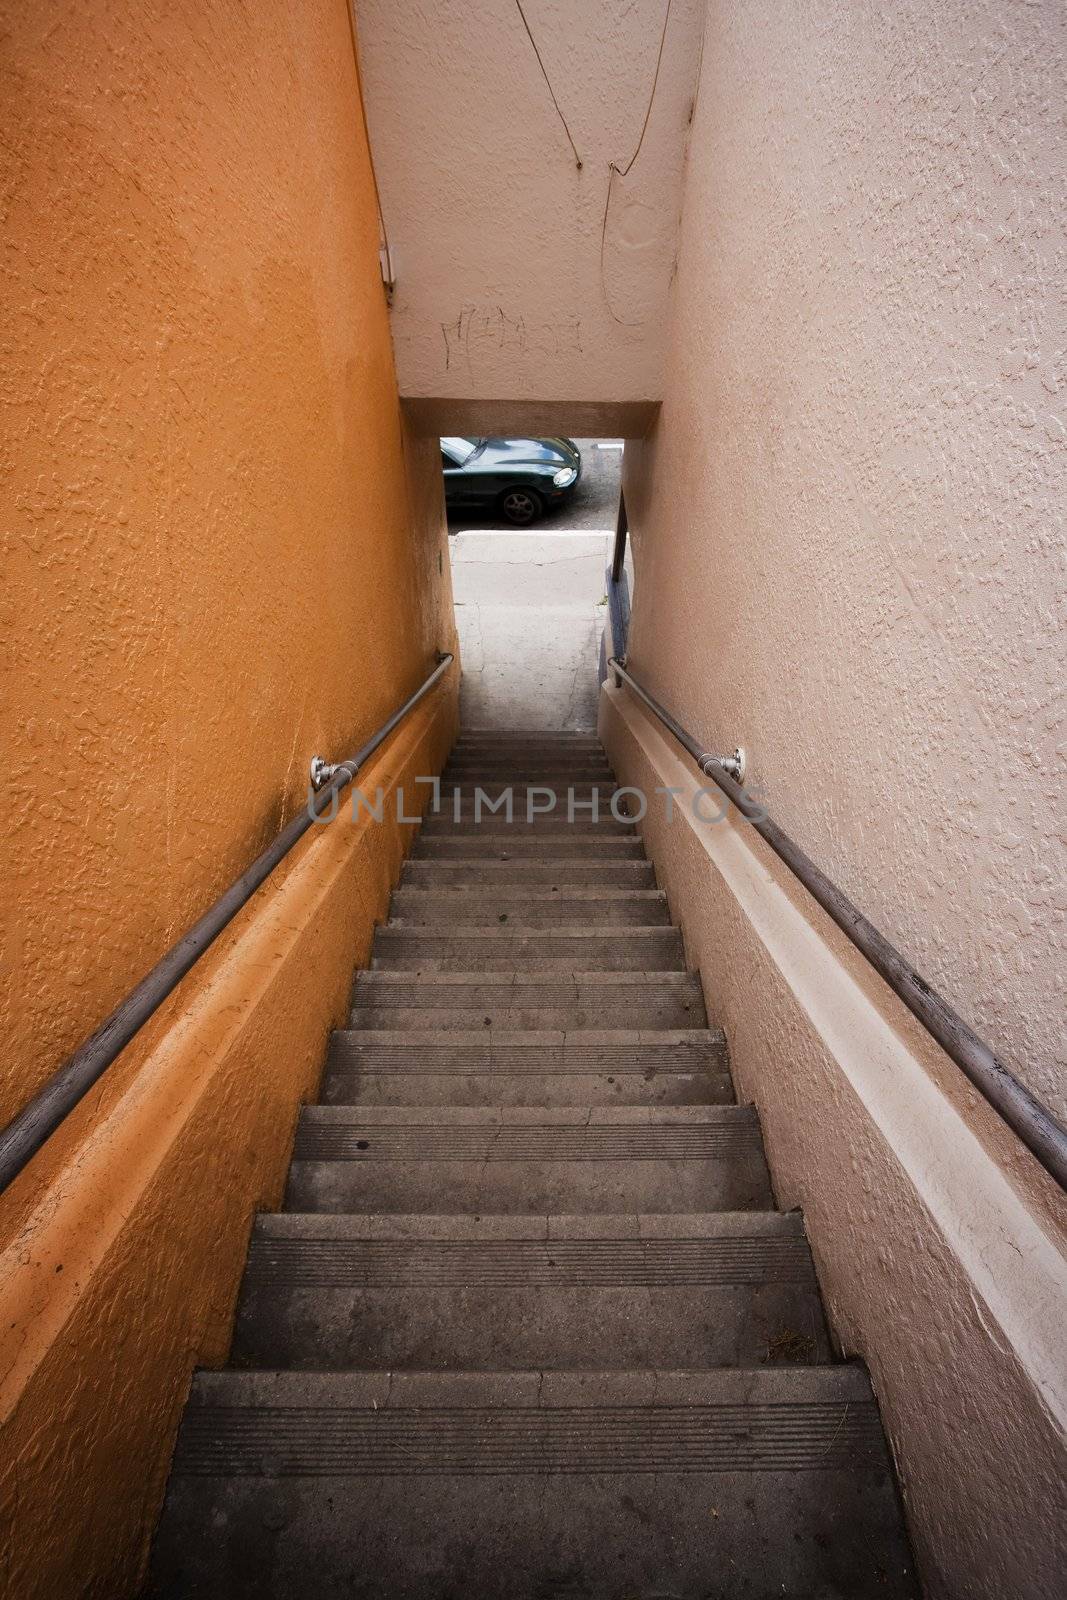 Long stairway to street where car is parked